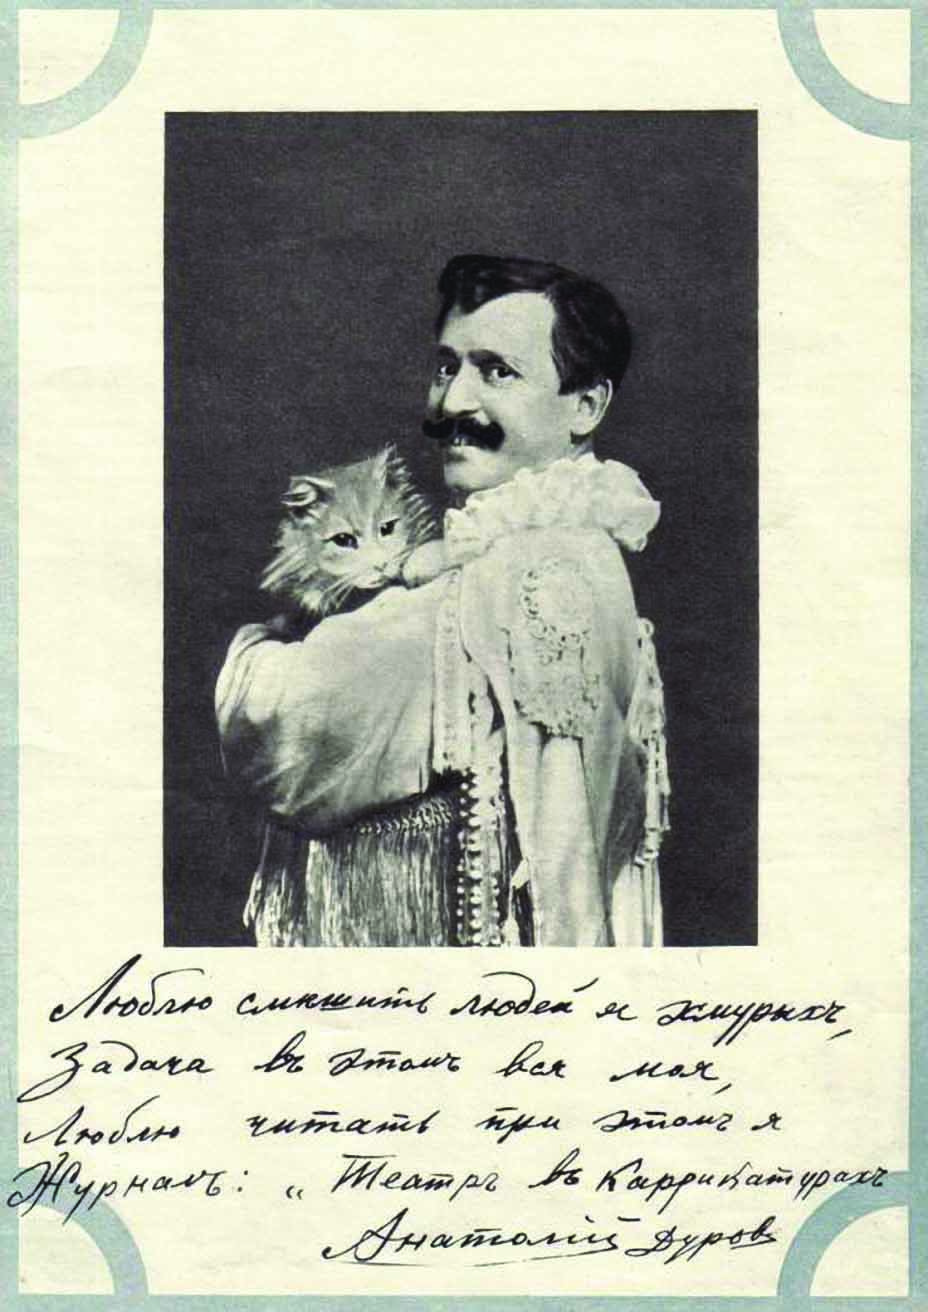 Analoy Durov holding a cat, 1913, a hand-signed photography from the “театр в карикатурах” [Theatre in Caricature] periodical. The caption reads: I enjoy entertaining morose people and this is the job I have. But I also enjoy reading  “Theatre in Caricature”. Anatoly Durov